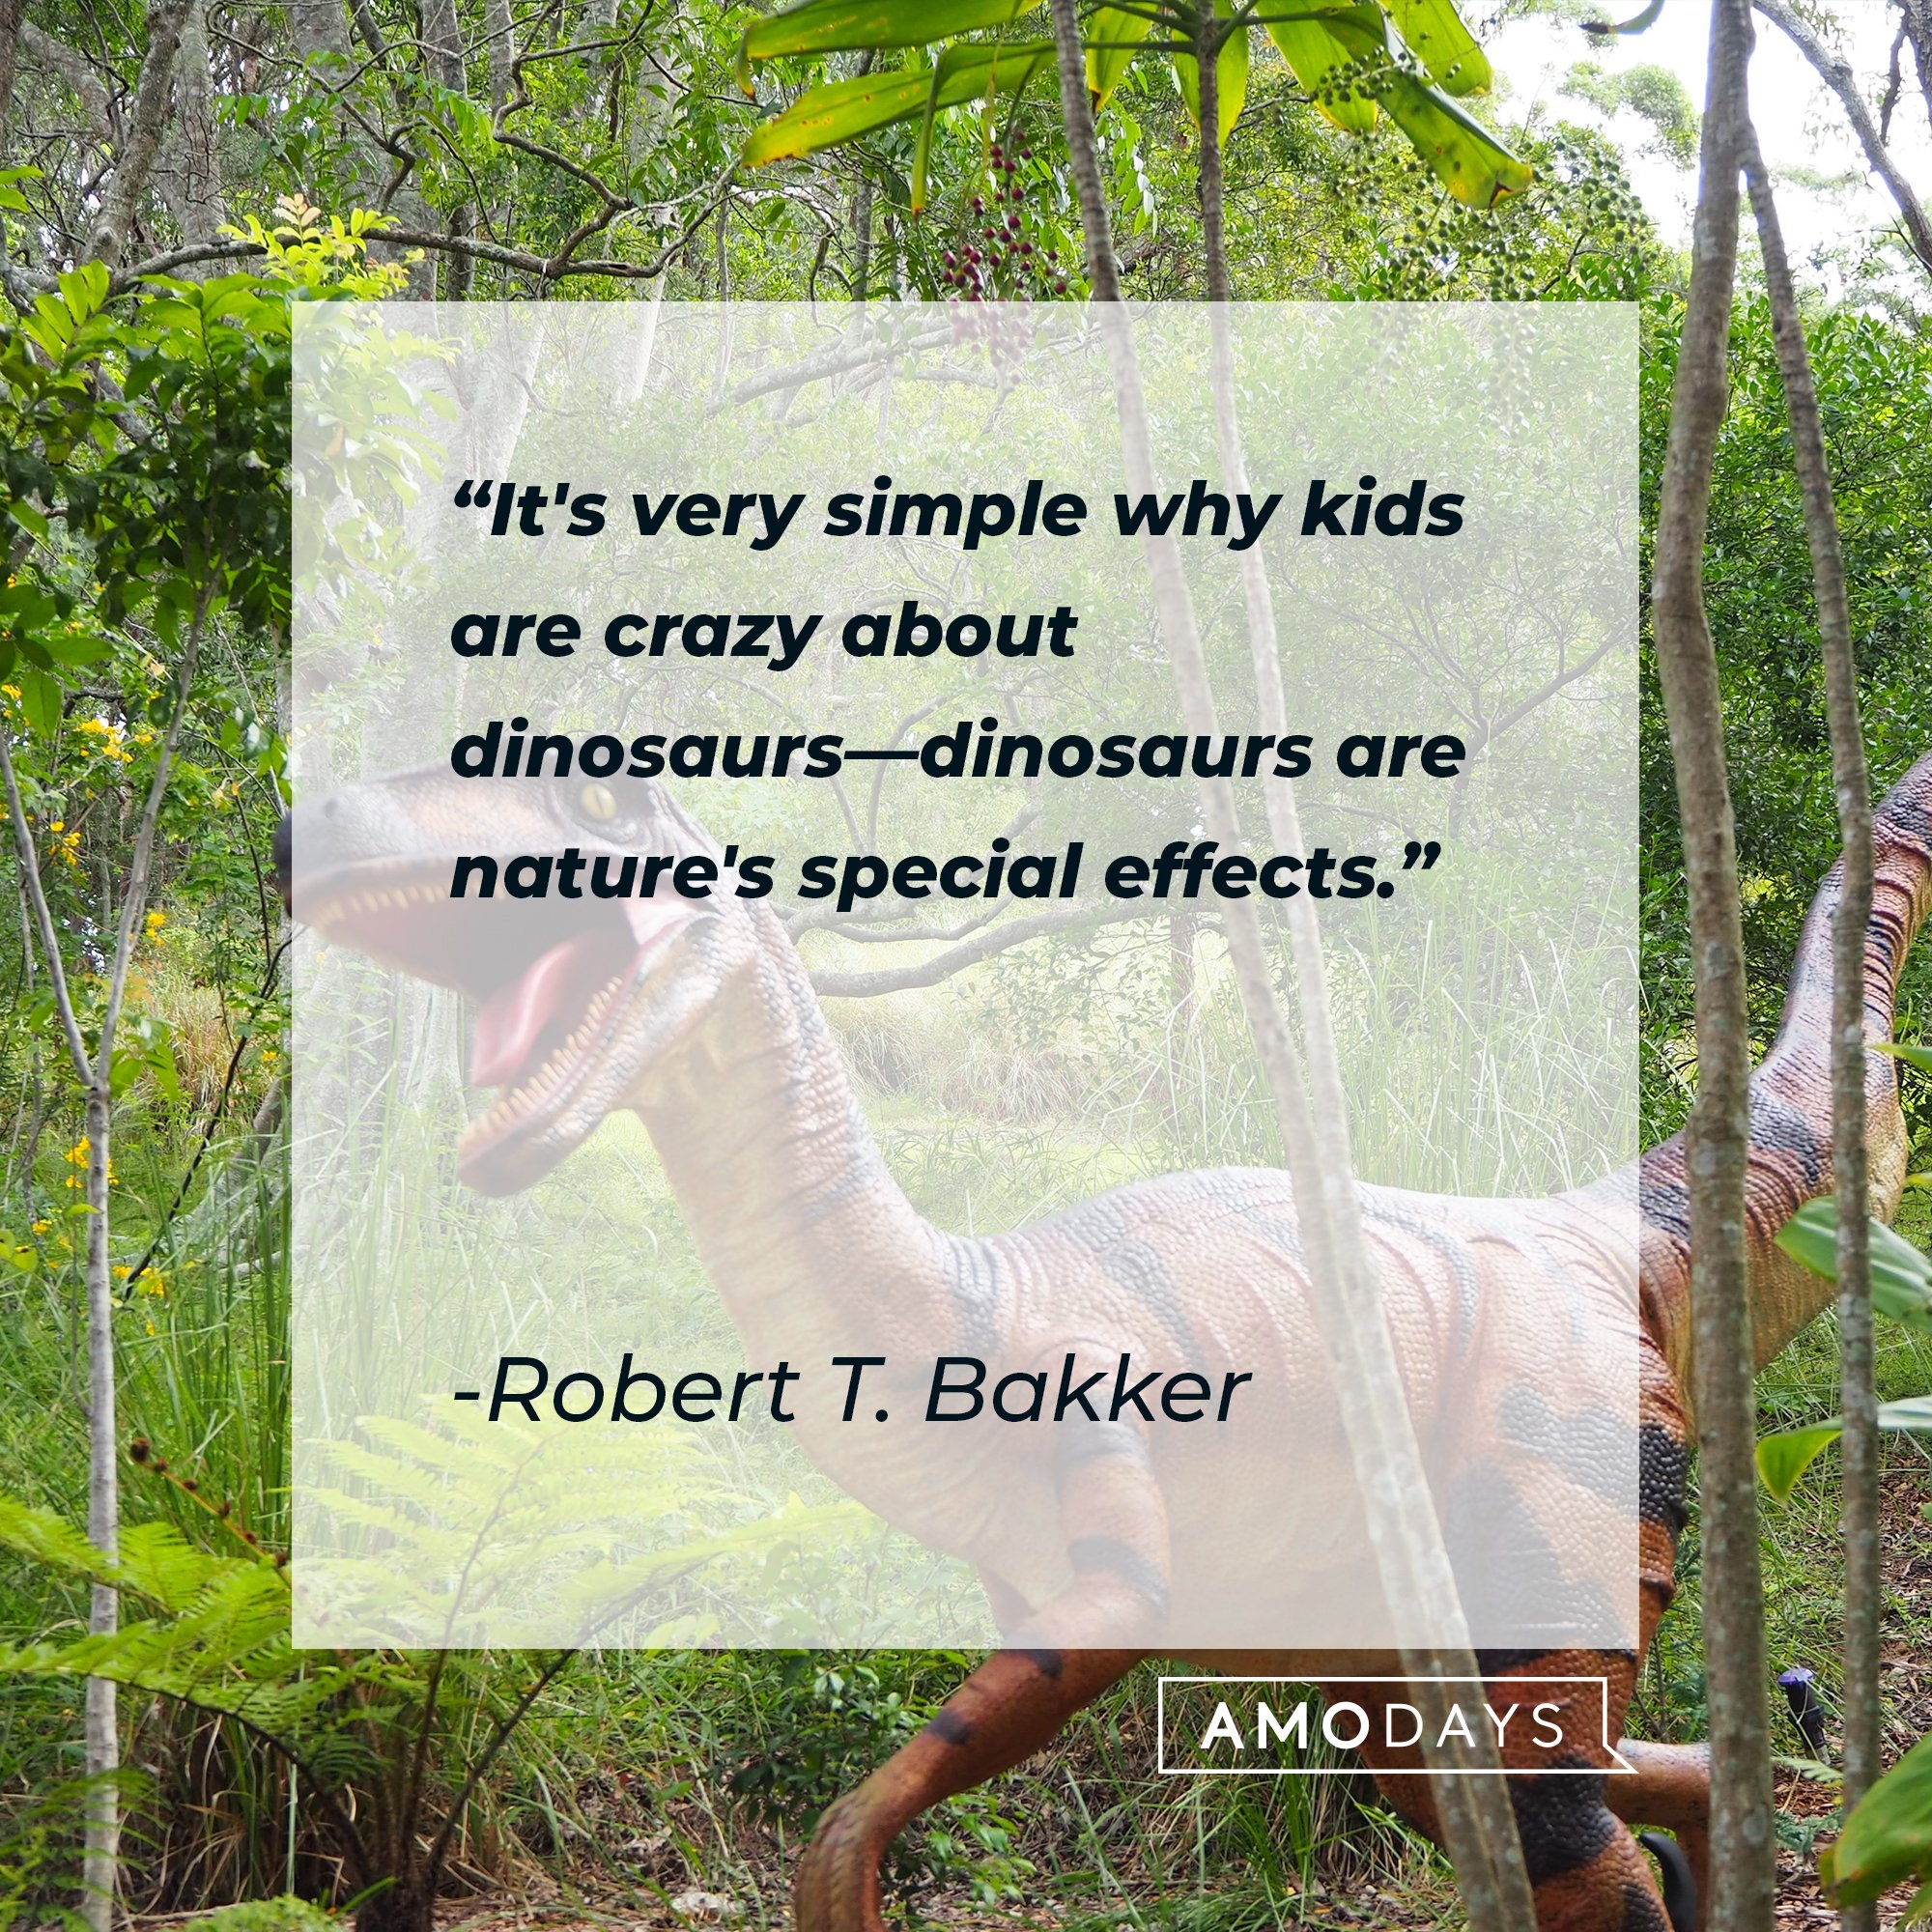 Robert T. Bakker’s quote: "It's very simple why kids are crazy about dinosaurs―dinosaurs are nature's special effects." | Image: AmoDays